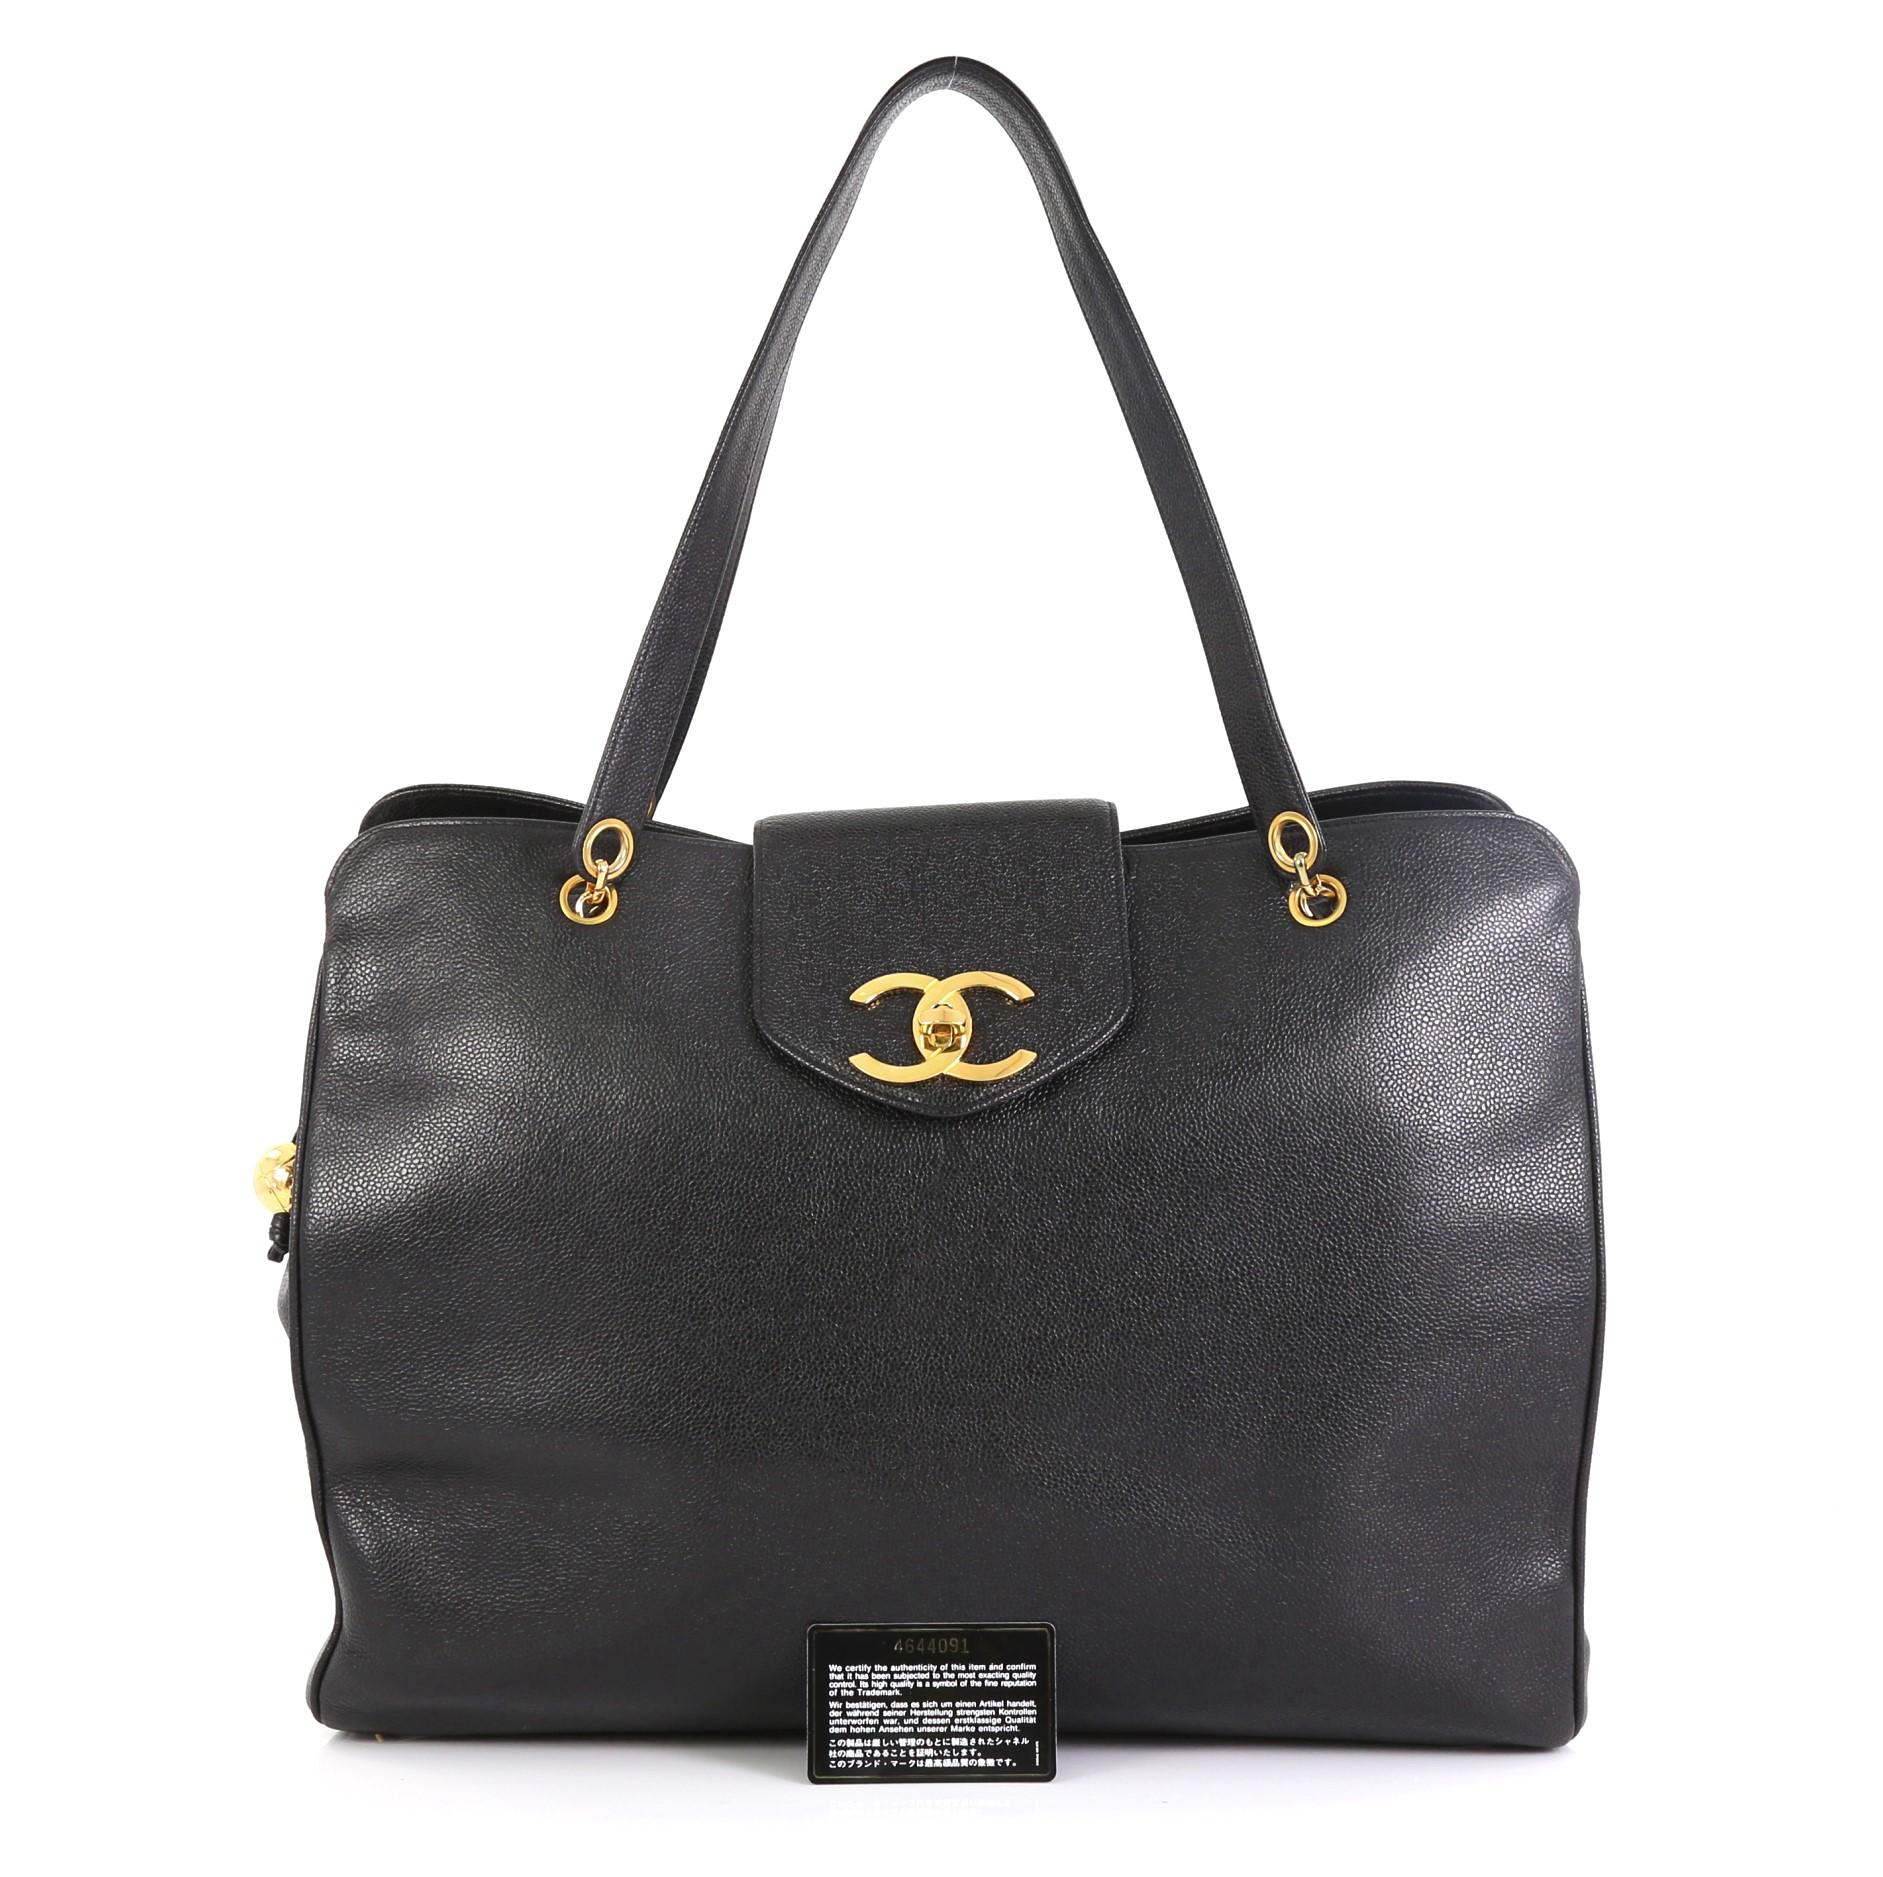 This Chanel Vintage Supermodel Weekender Bag Caviar Large, crafted in black caviar leather, features woven-in leather chain straps with shoulder pads and gold-tone hardware. Its CC turn-lock and zip closures open to a black fabric interior. Hologram